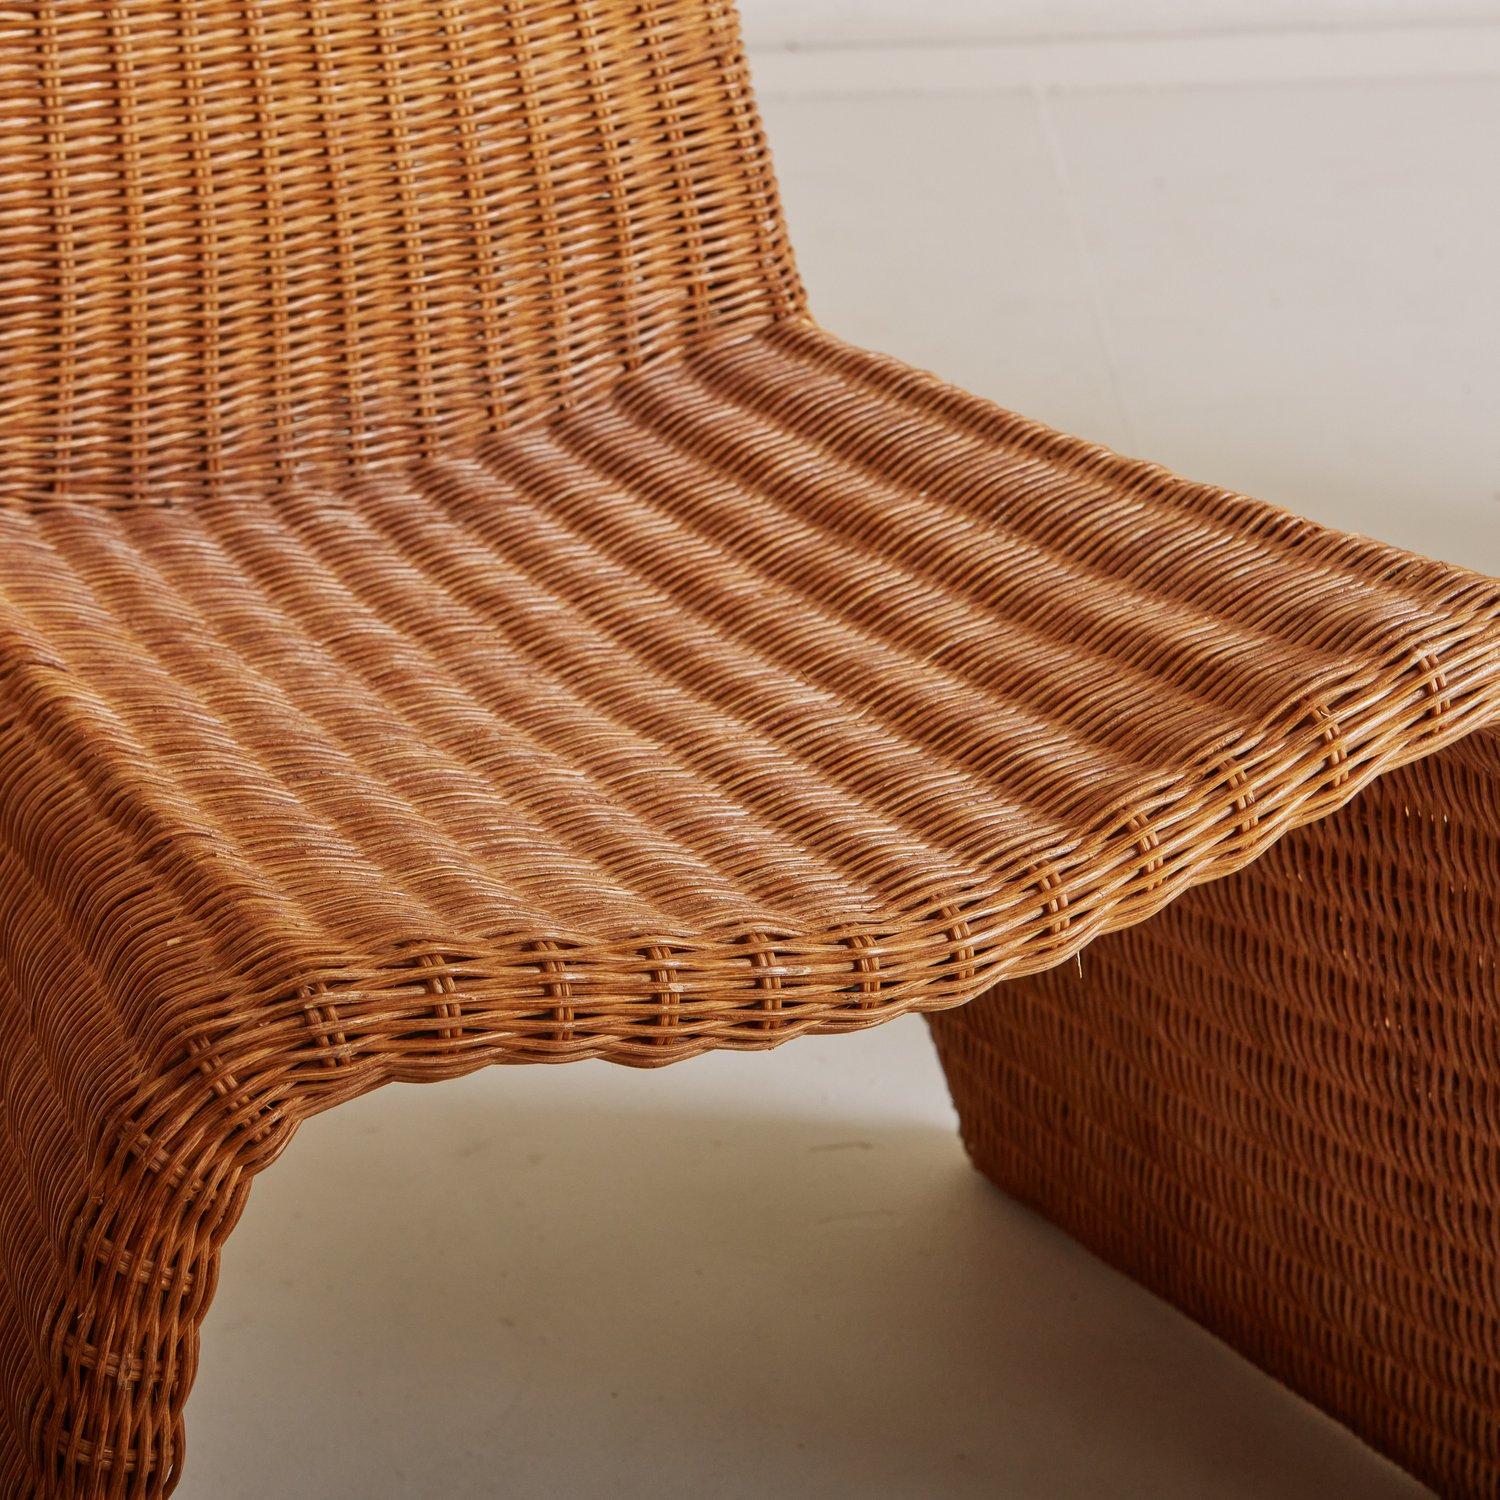 Set of 5 Sculptural Wicker Dining Chairs, Spain 20th Century 8